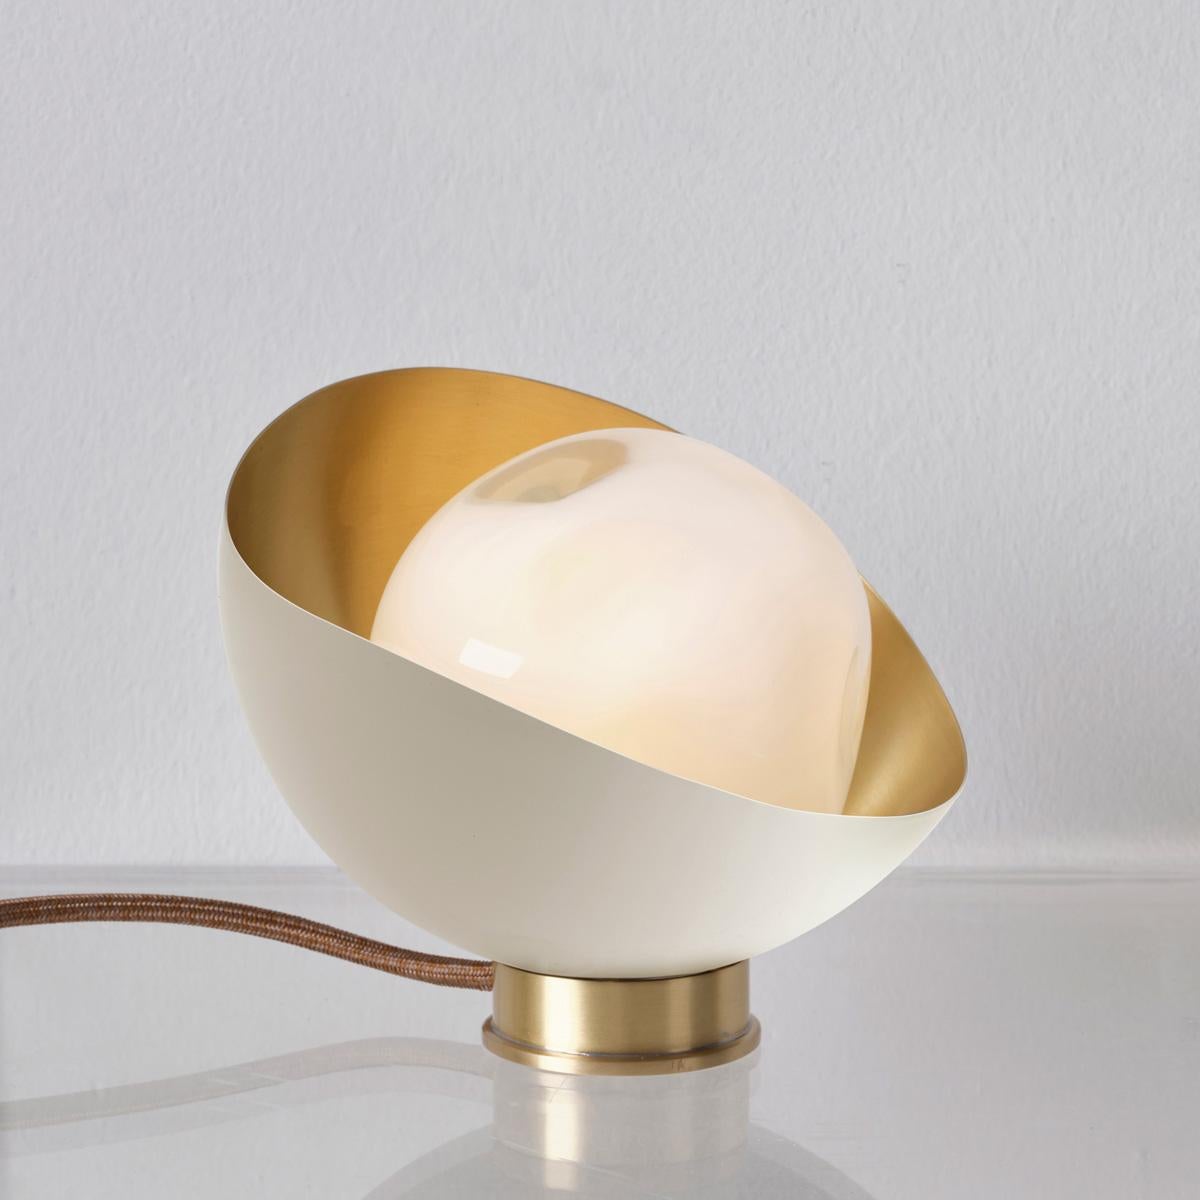 The Perla Mini table lamp is the smallest member of the Perla collection featuring an organic brass shell nestling our Sfera glass handblown in Murano. See the Perla and Perla Grande for larger models.

The primary images show it in Sand White and